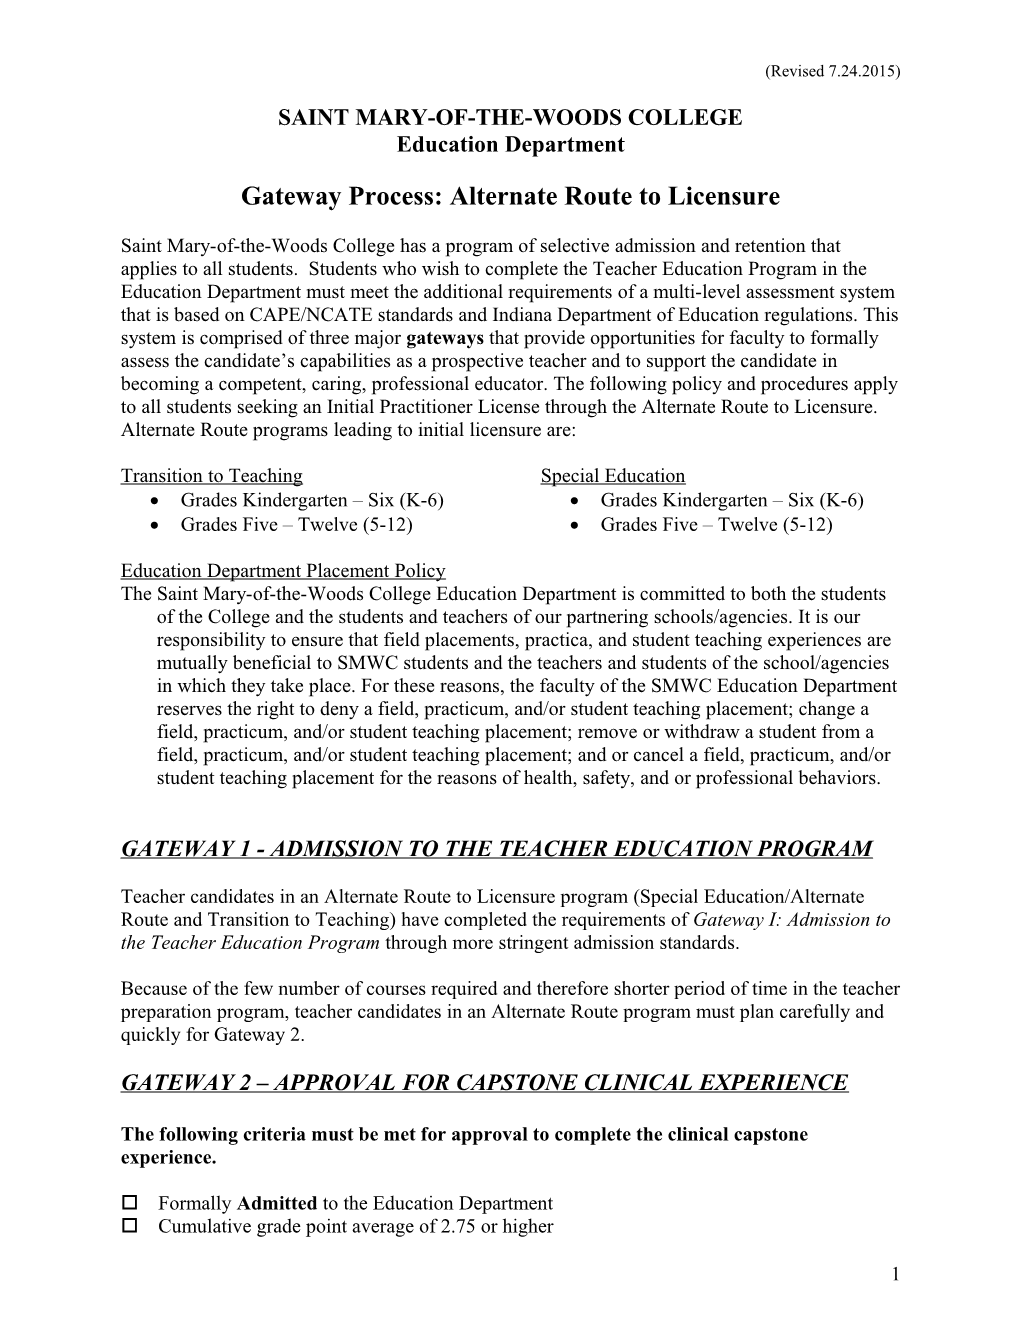 Gateway Process: Alternate Route to Licensure